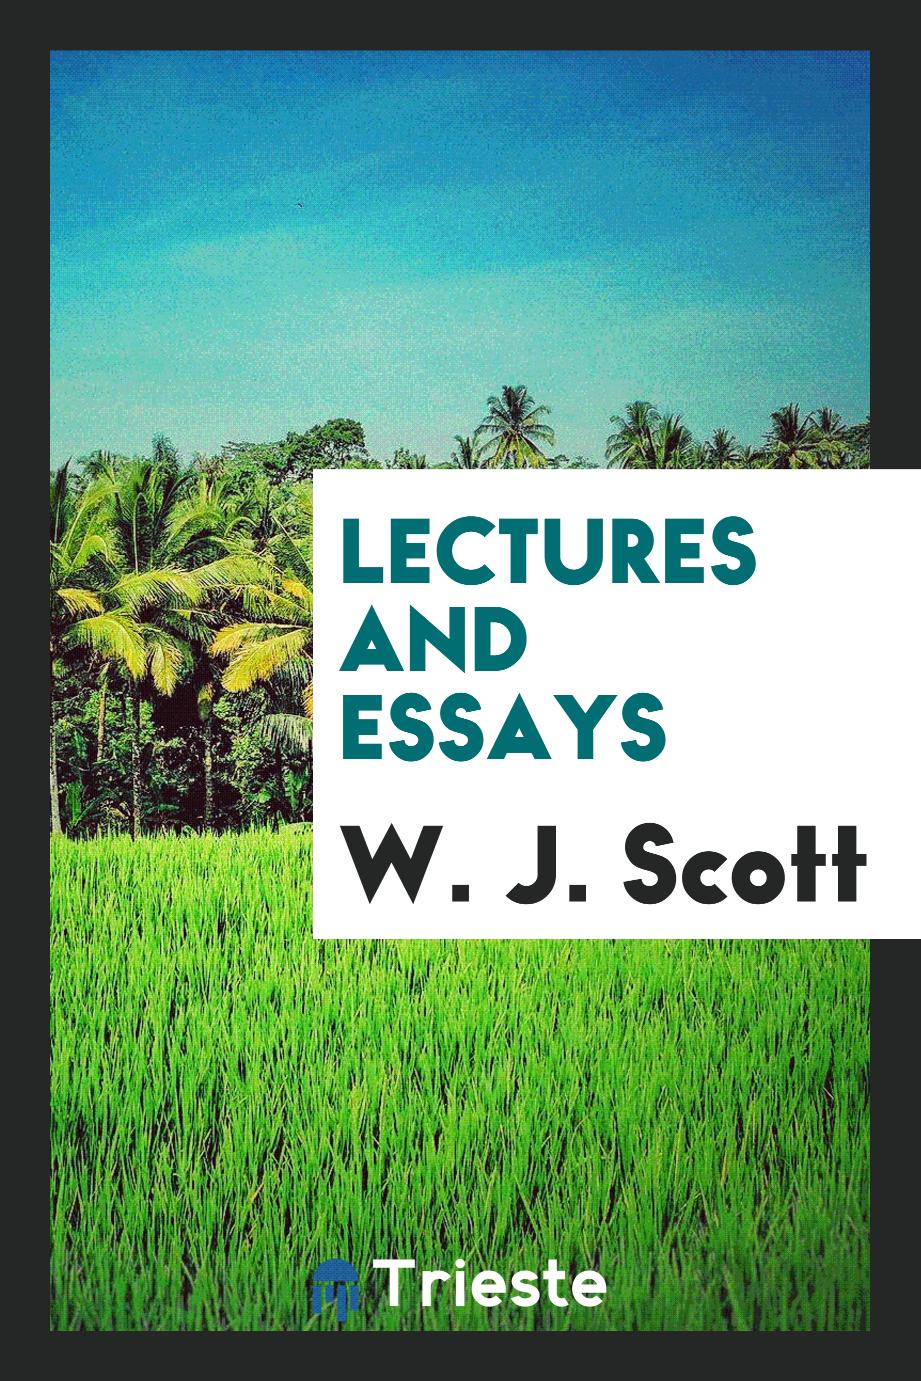 Lectures and essays